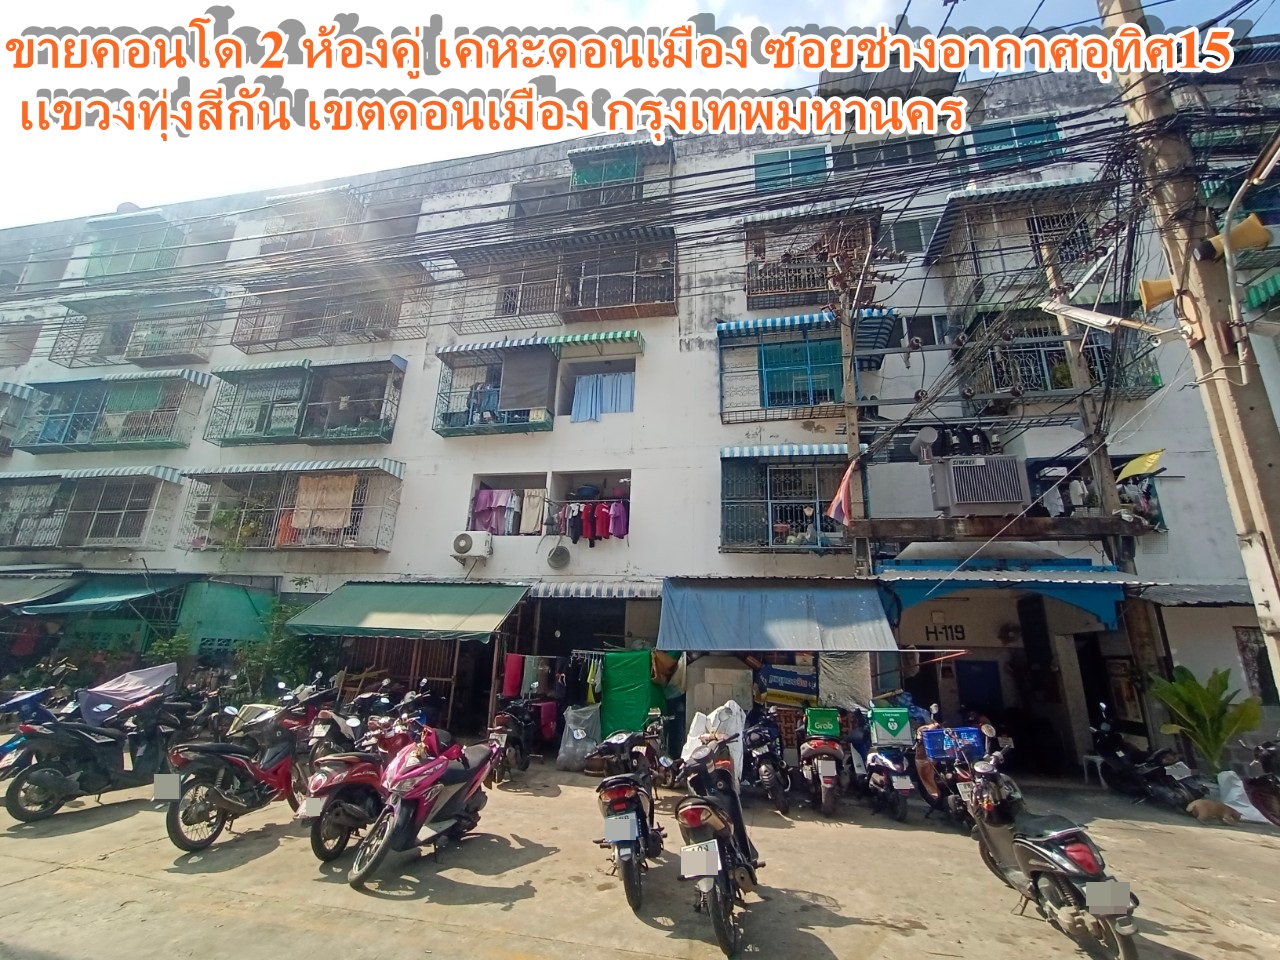 Condo for sale, 2 double rooms, Don Mueang Housing, Soi Chang Akat Uthit 15 Thung Si Kan Subdistrict, Don Mueang District, Bangkok